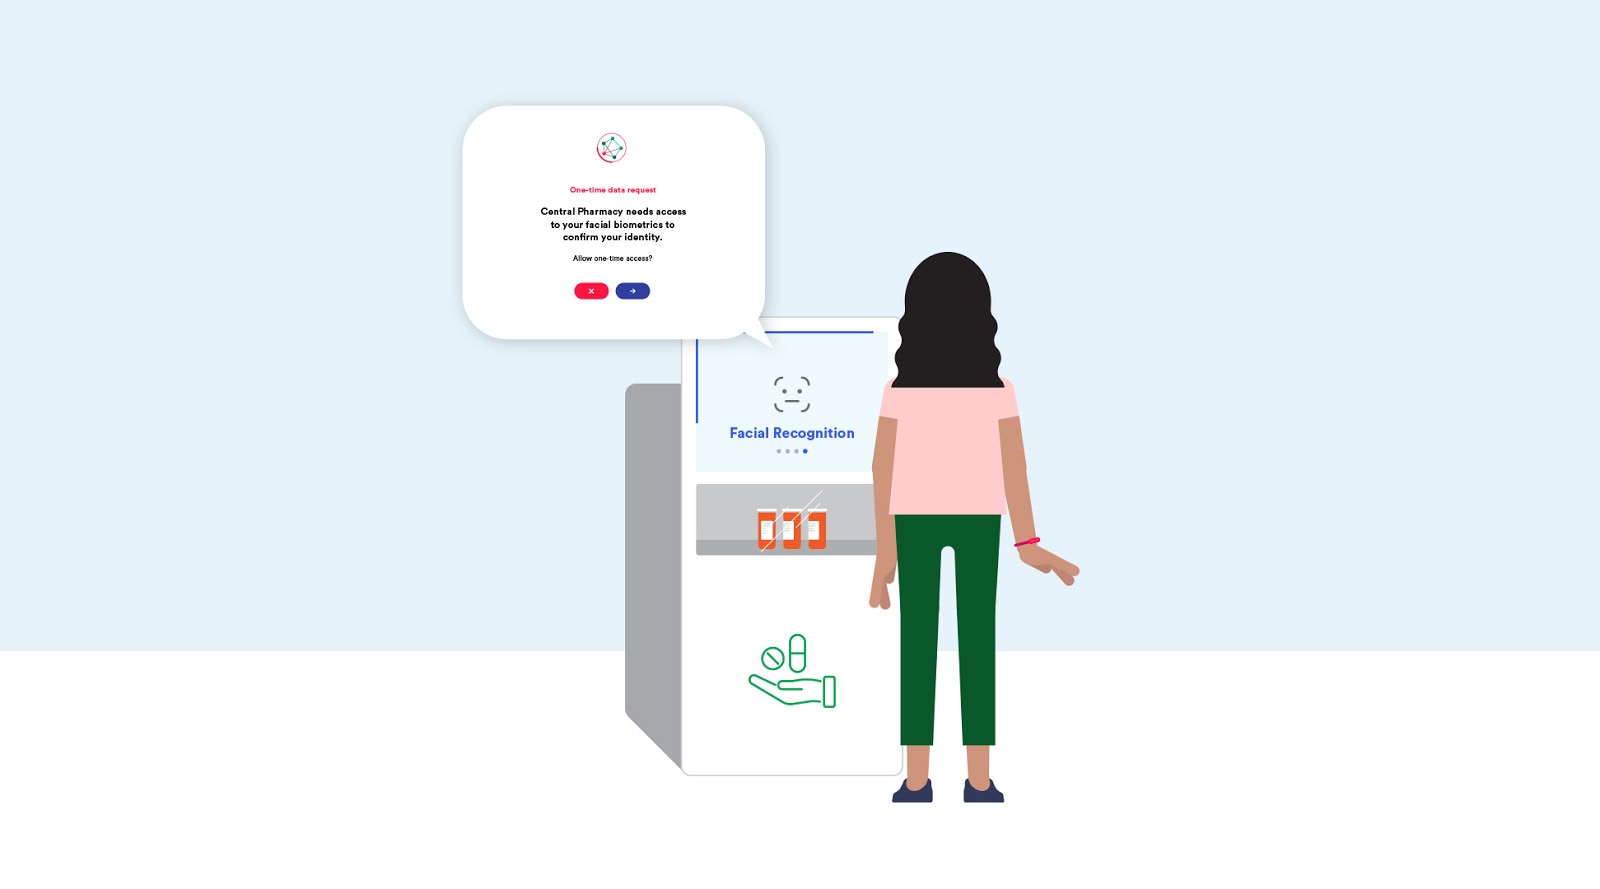 A graphic illustration of a patient using a medication dispensing machine that verifies the patient's identity through facial recognition.